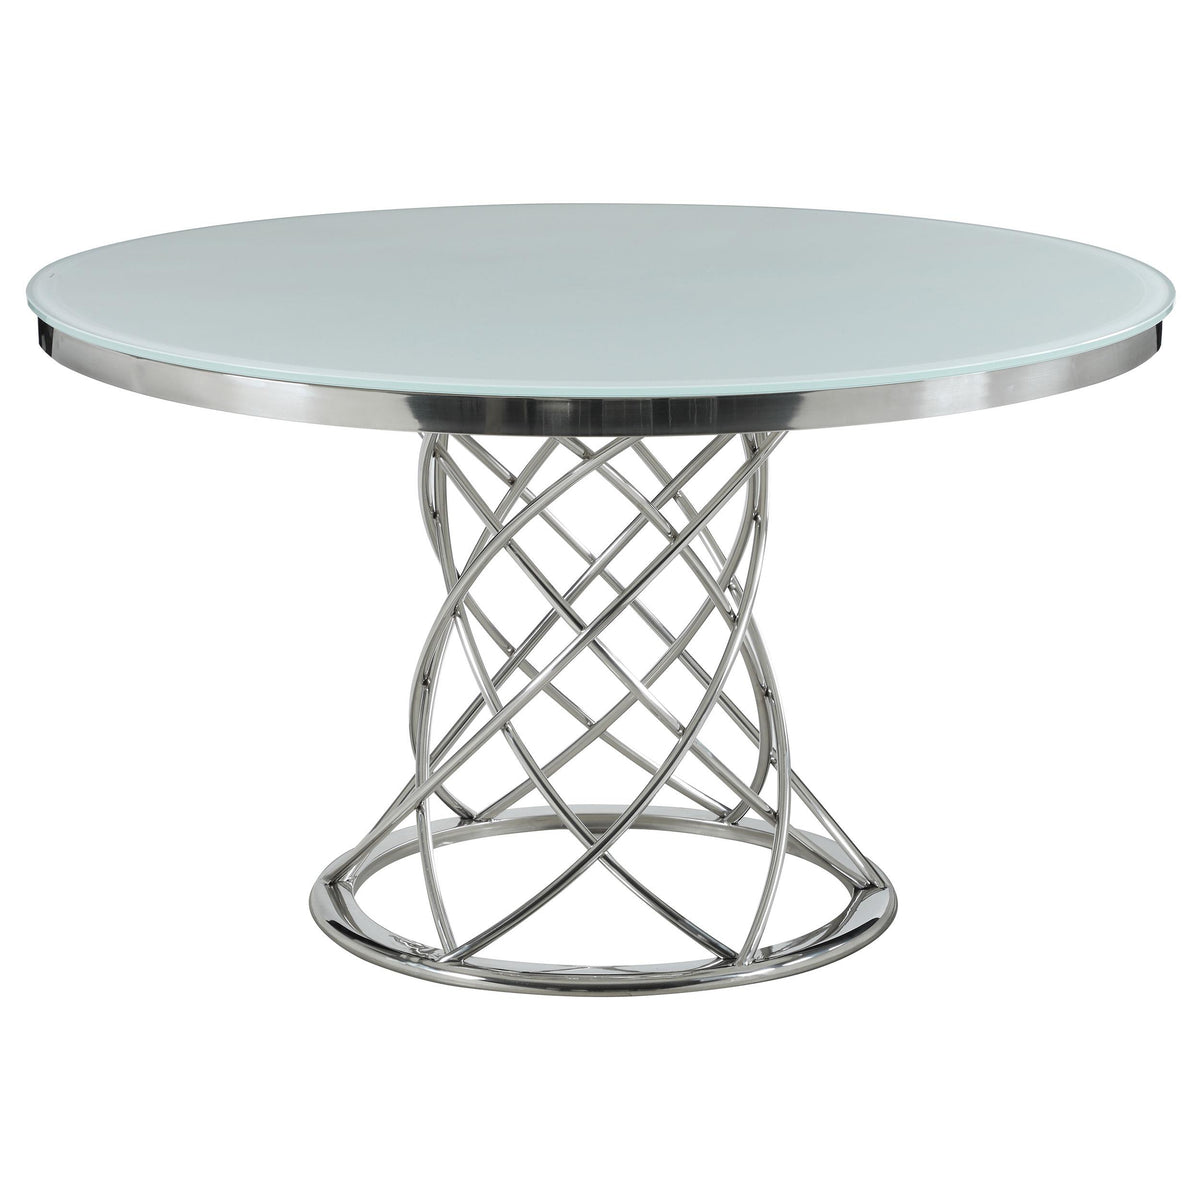 Irene Round Glass Top Dining Table White and Chrome  Las Vegas Furniture Stores